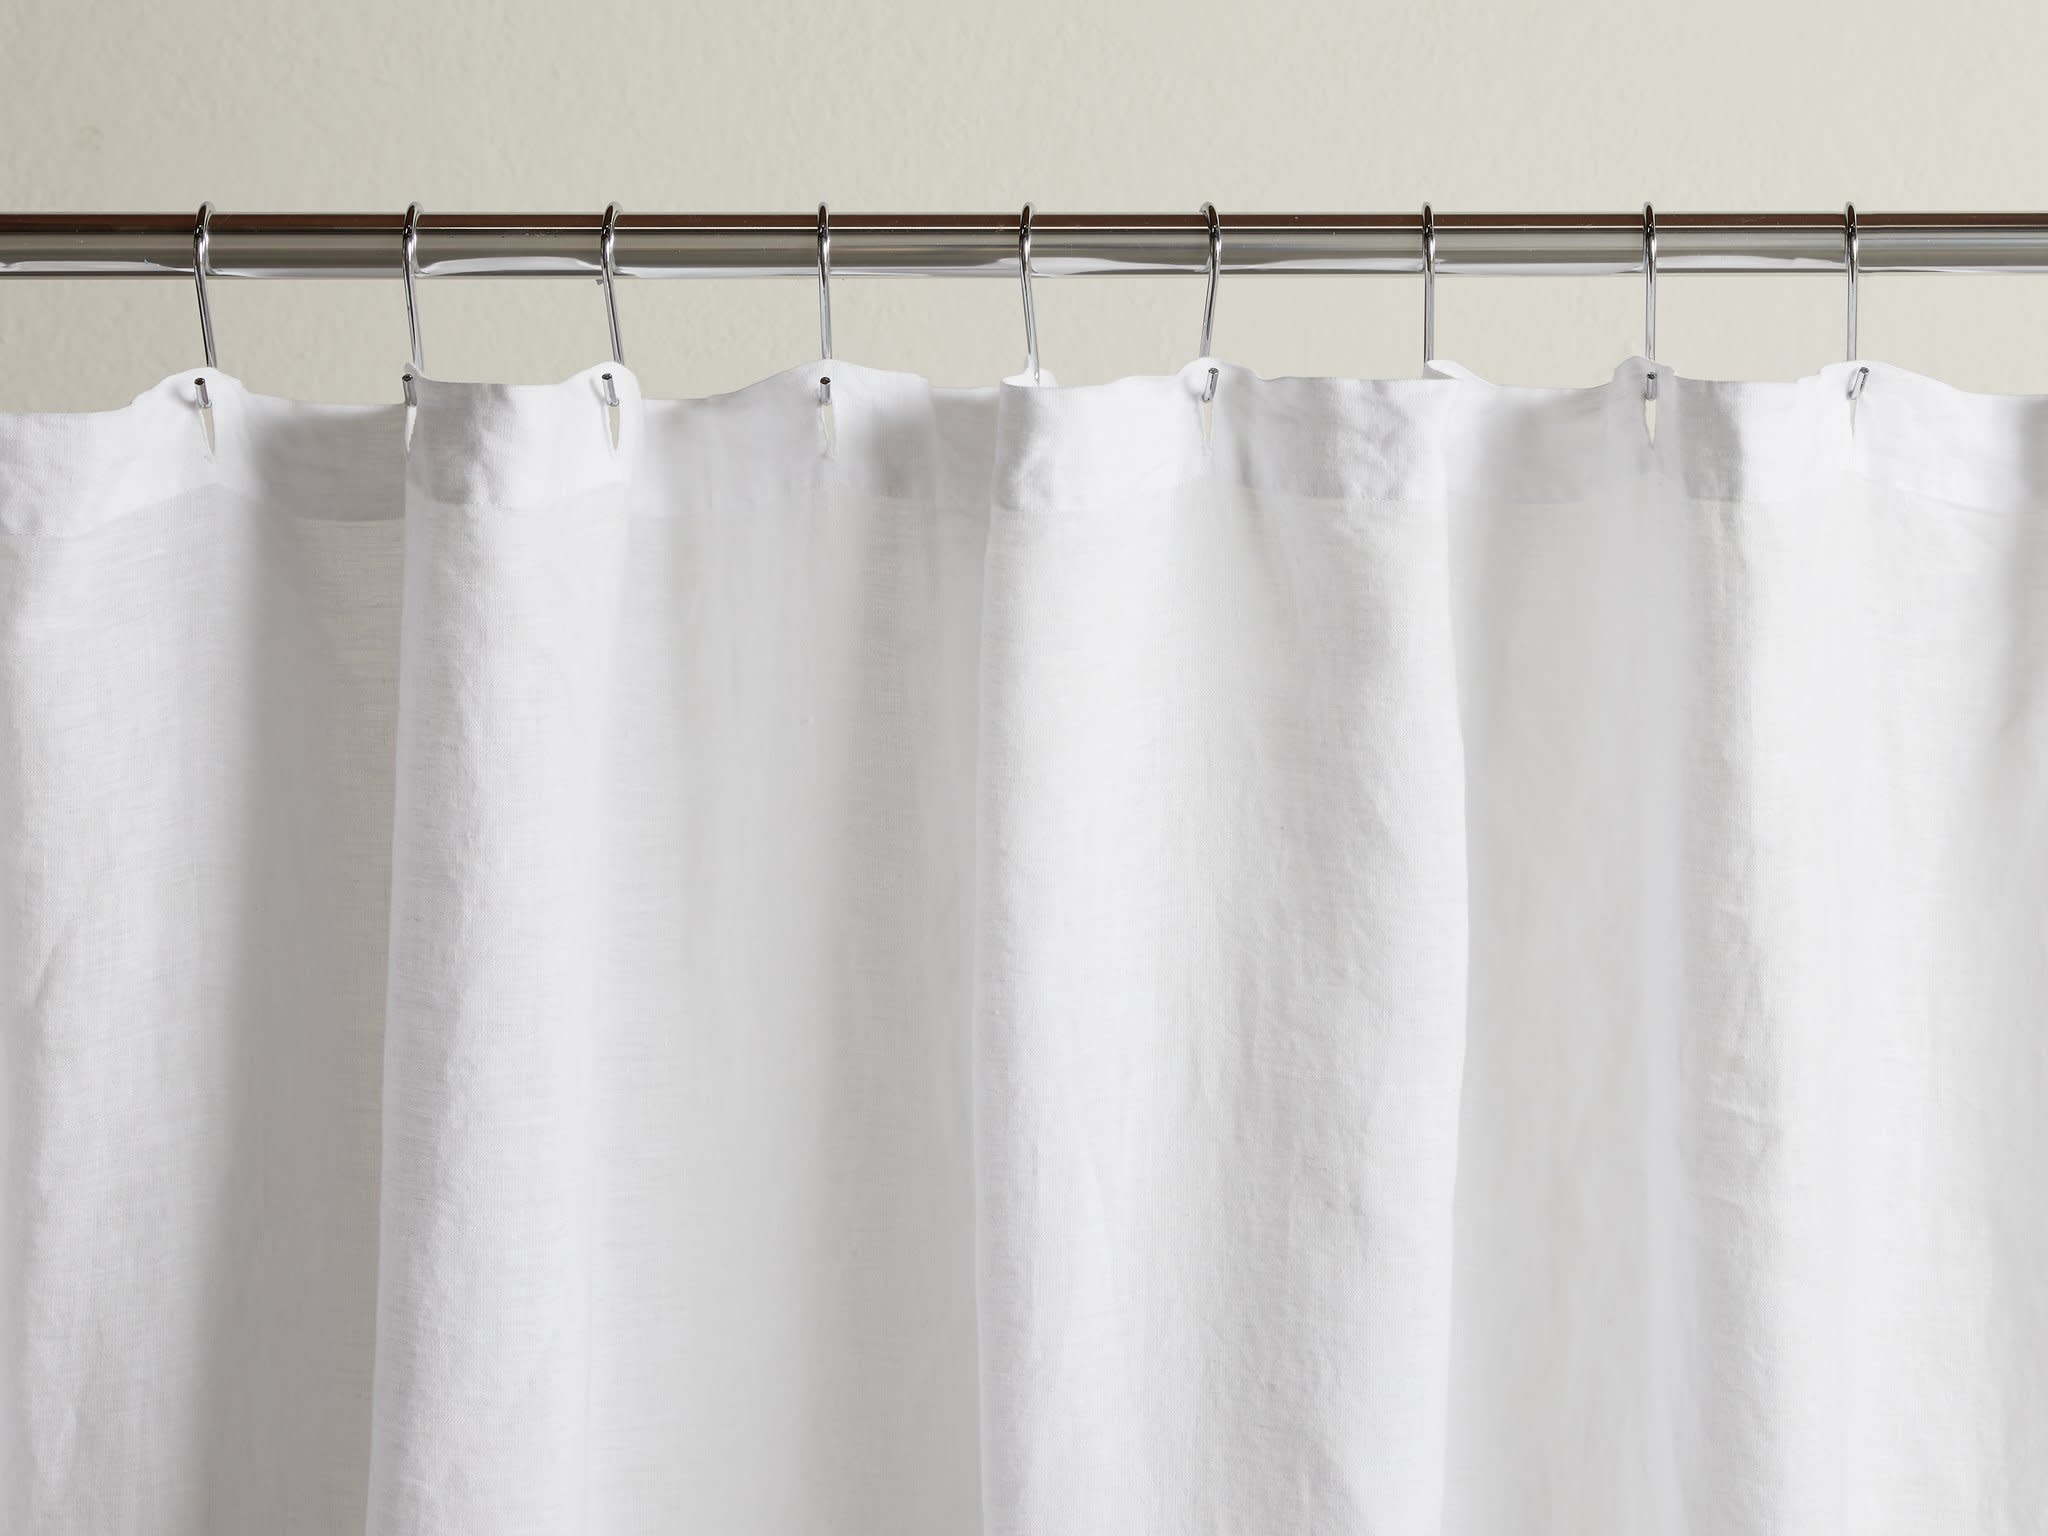 White Linen Shower Curtain Shown In A Room